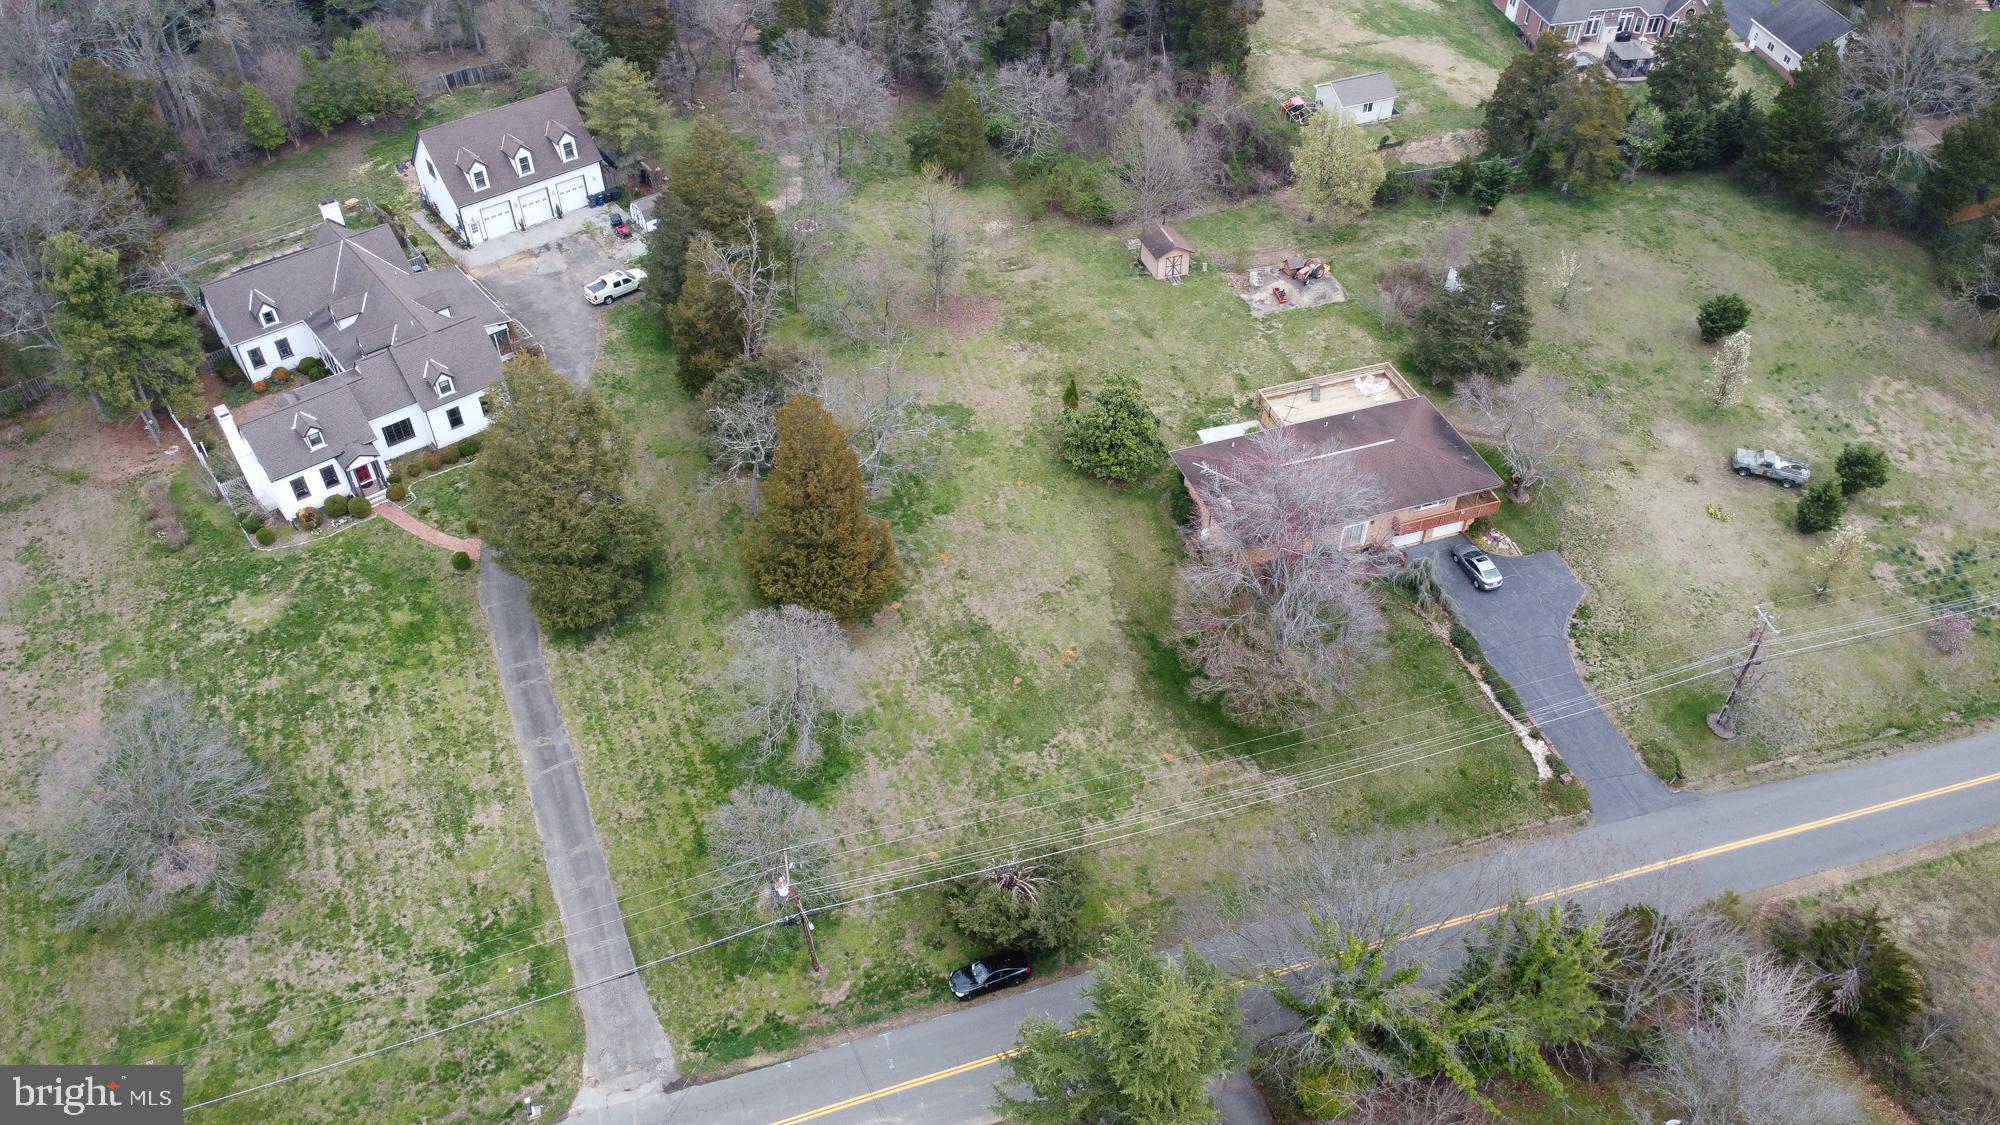 an aerial view of house with outdoor space